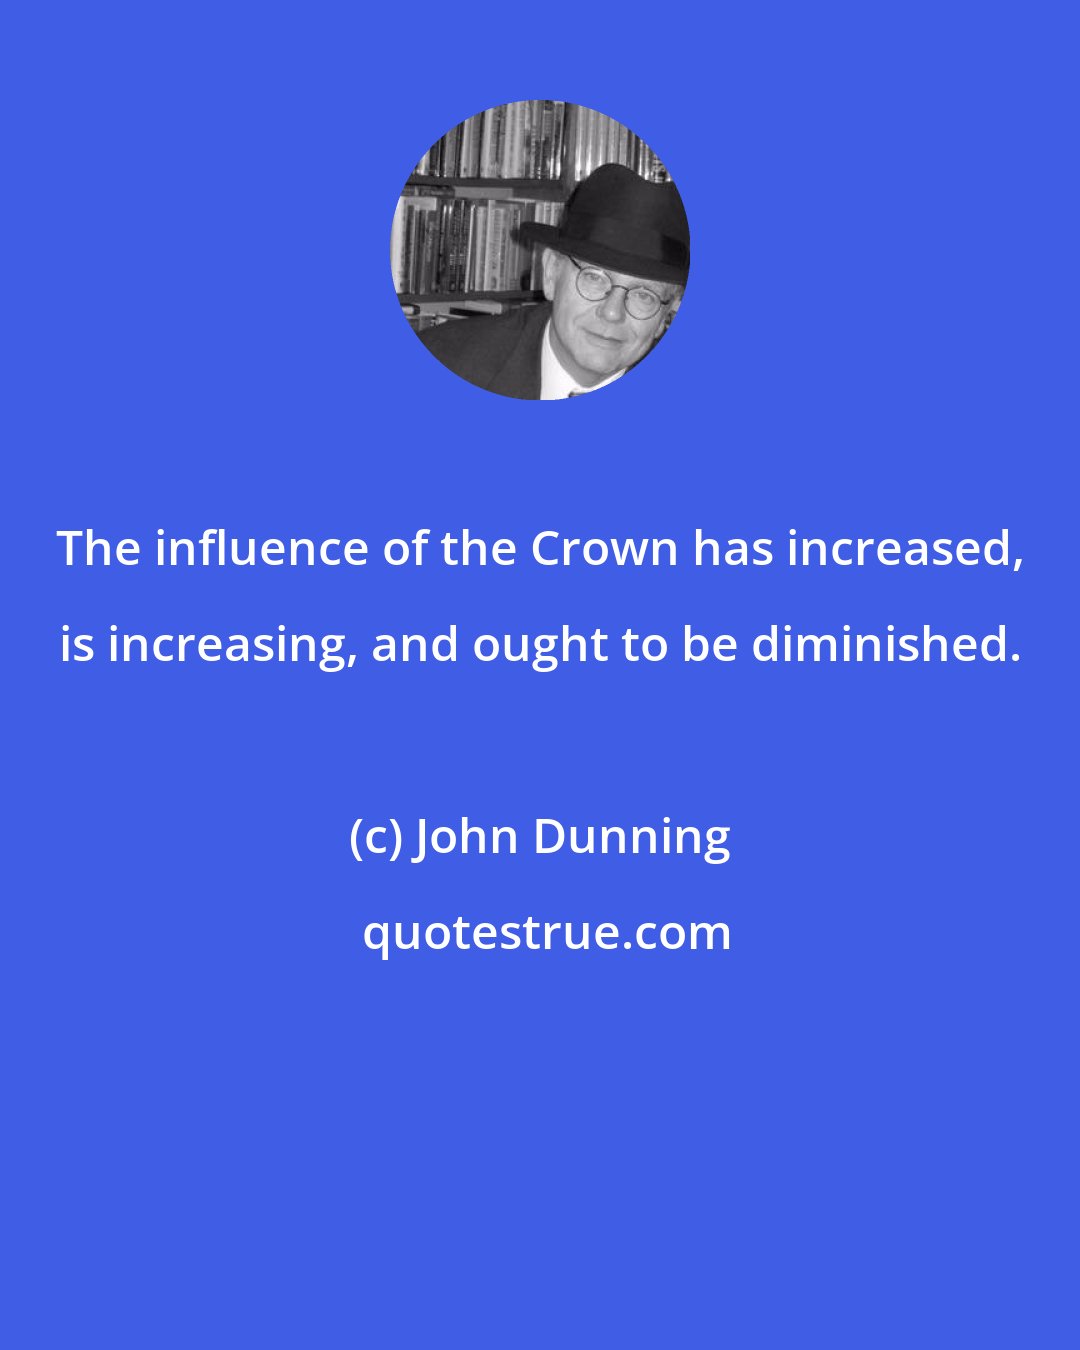 John Dunning: The influence of the Crown has increased, is increasing, and ought to be diminished.